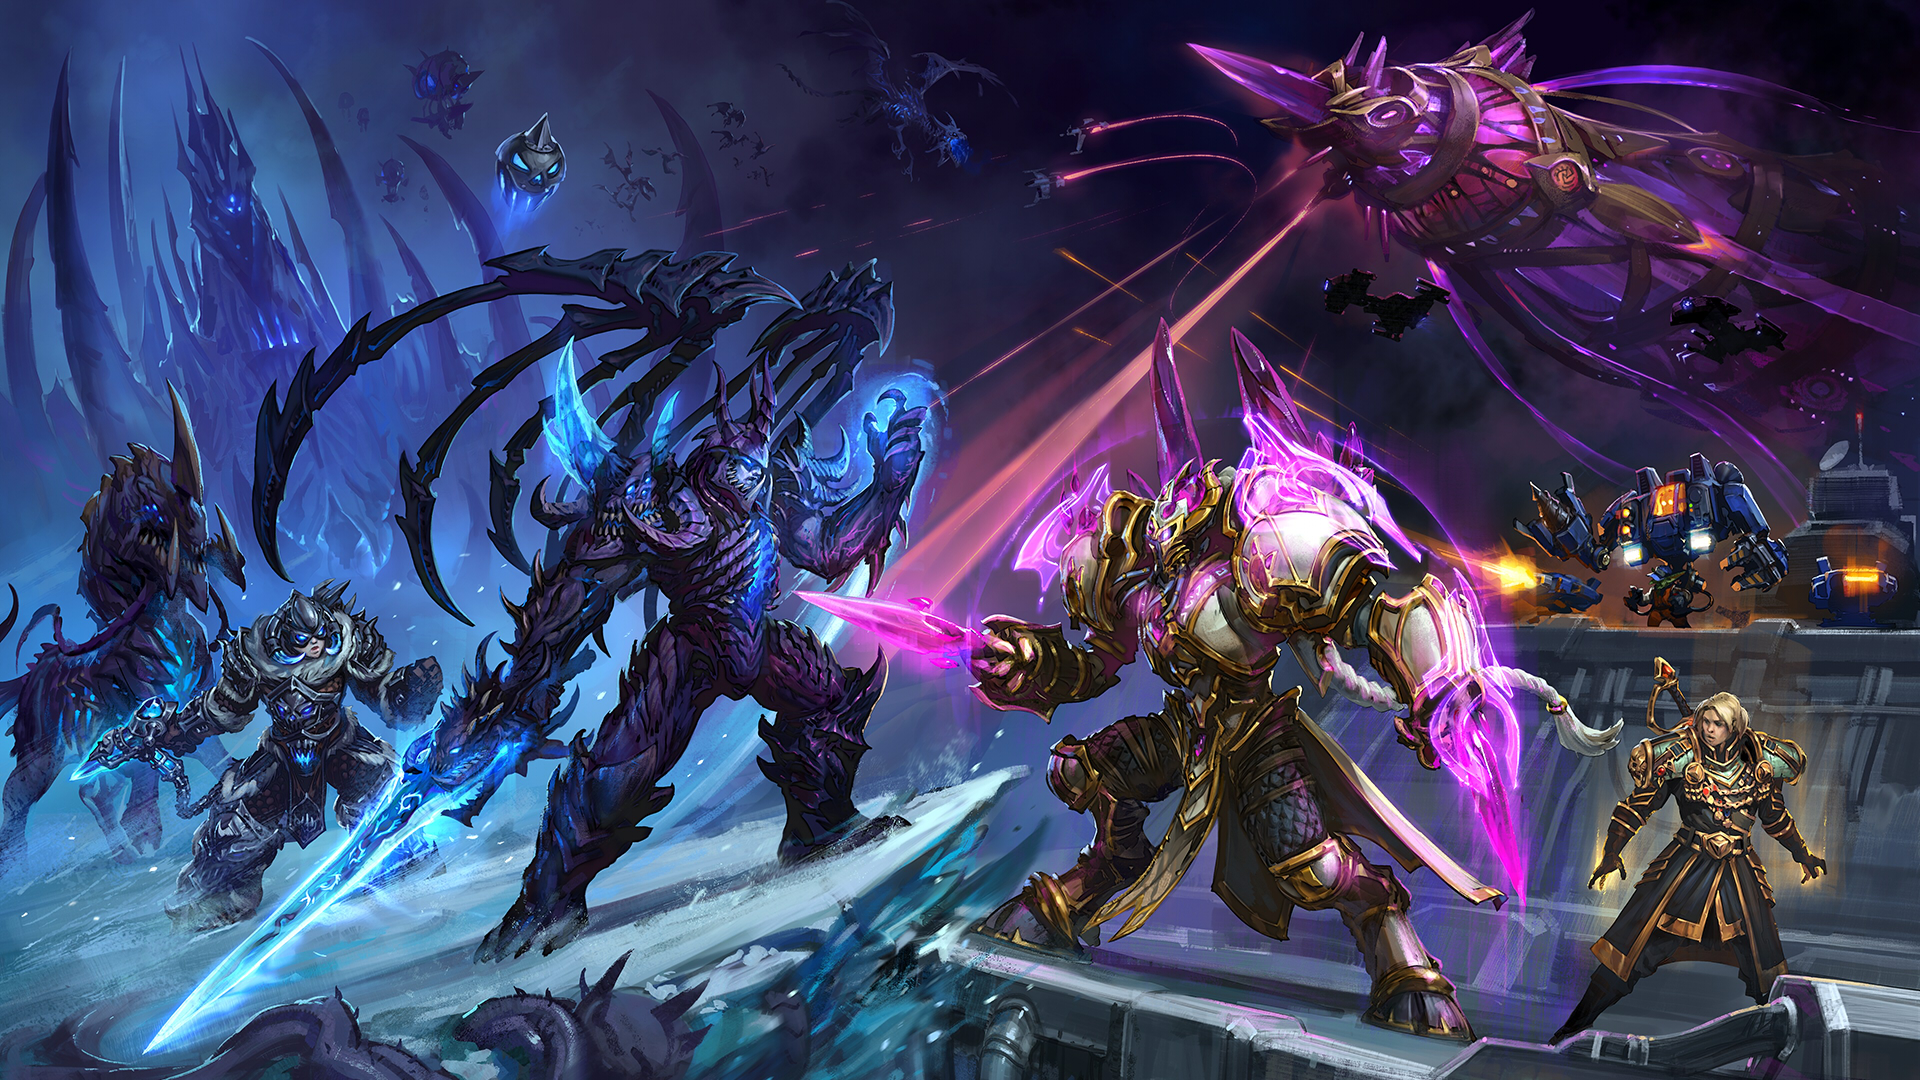 Arthas and Artanis duke it out amid a backdrop of other heroes.